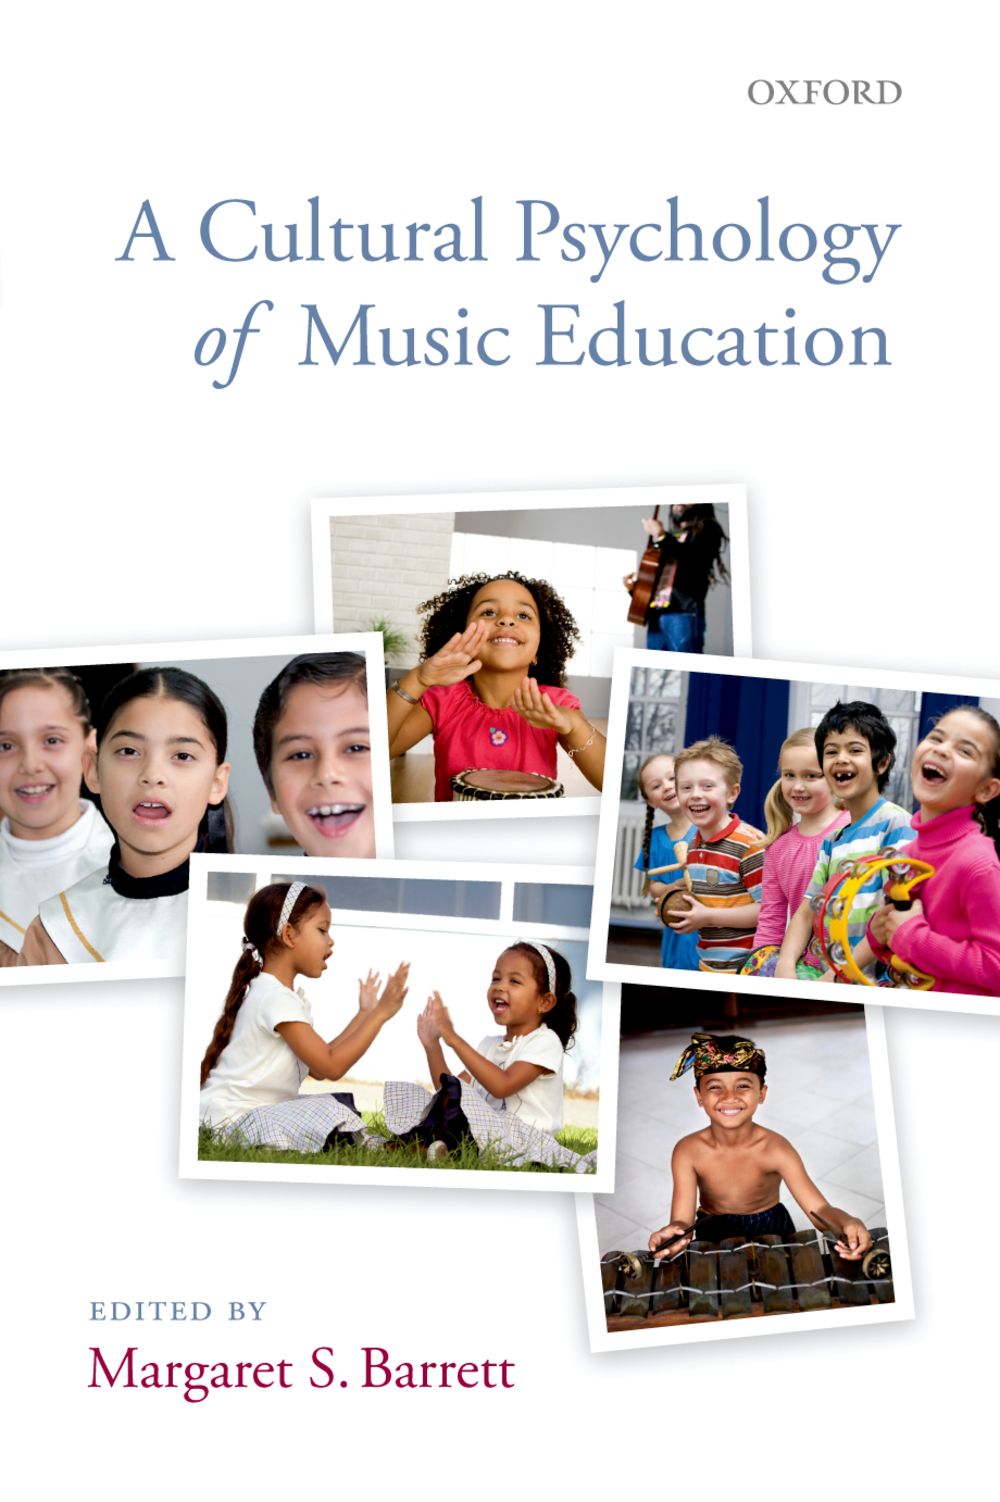 A Cultural Psychology of Music Education